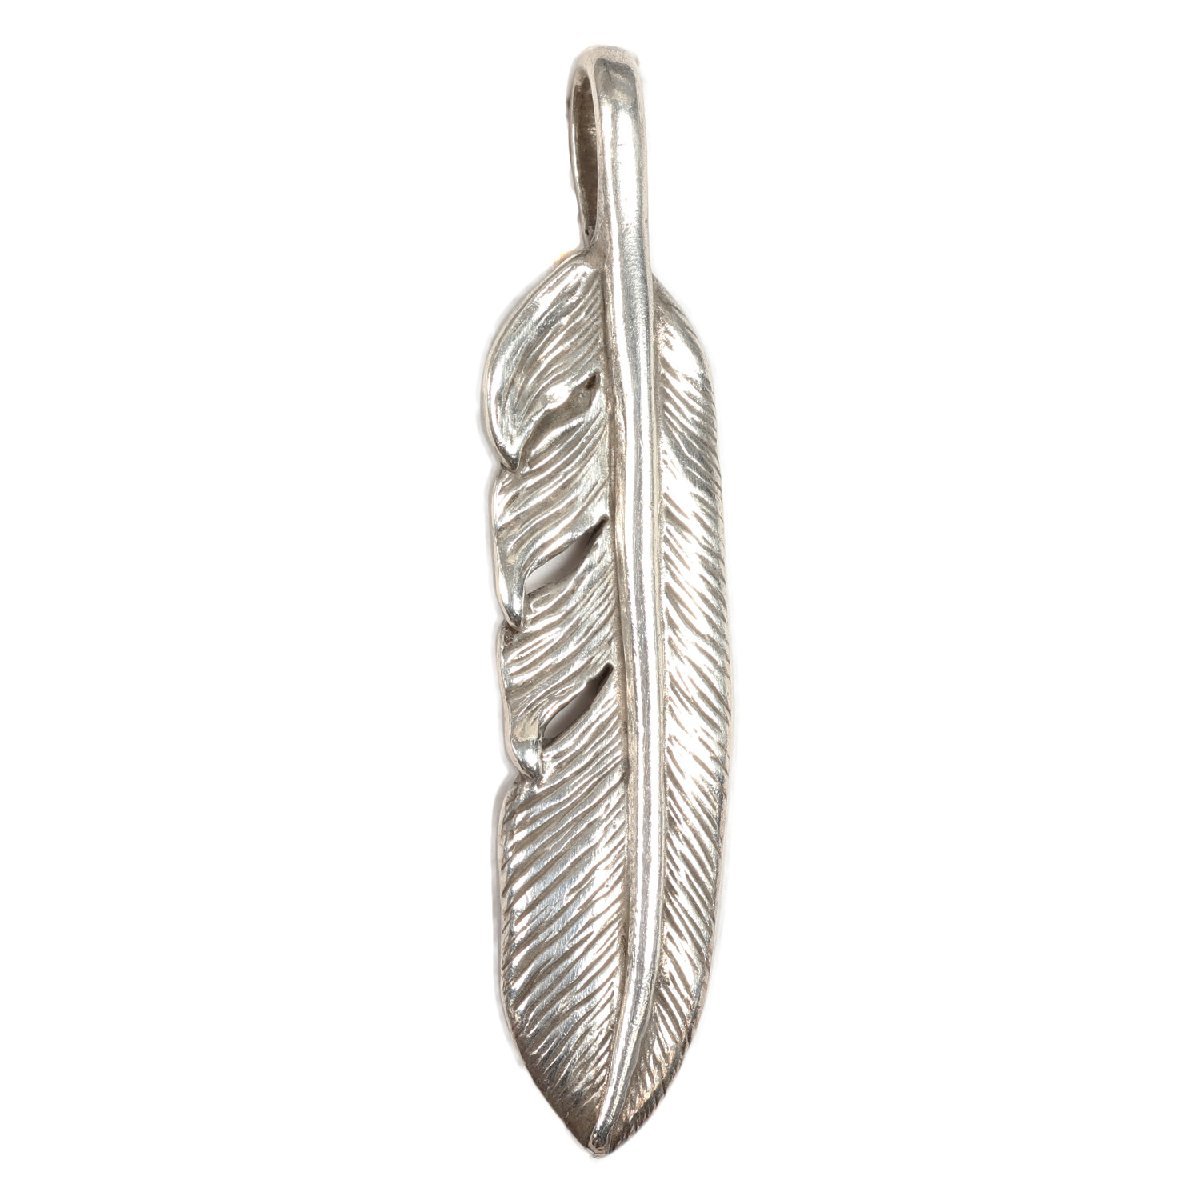 TADY&KINGtati-& King silver plain feather silver 925 S( left direction ) accessory jewelry brand pendant top 